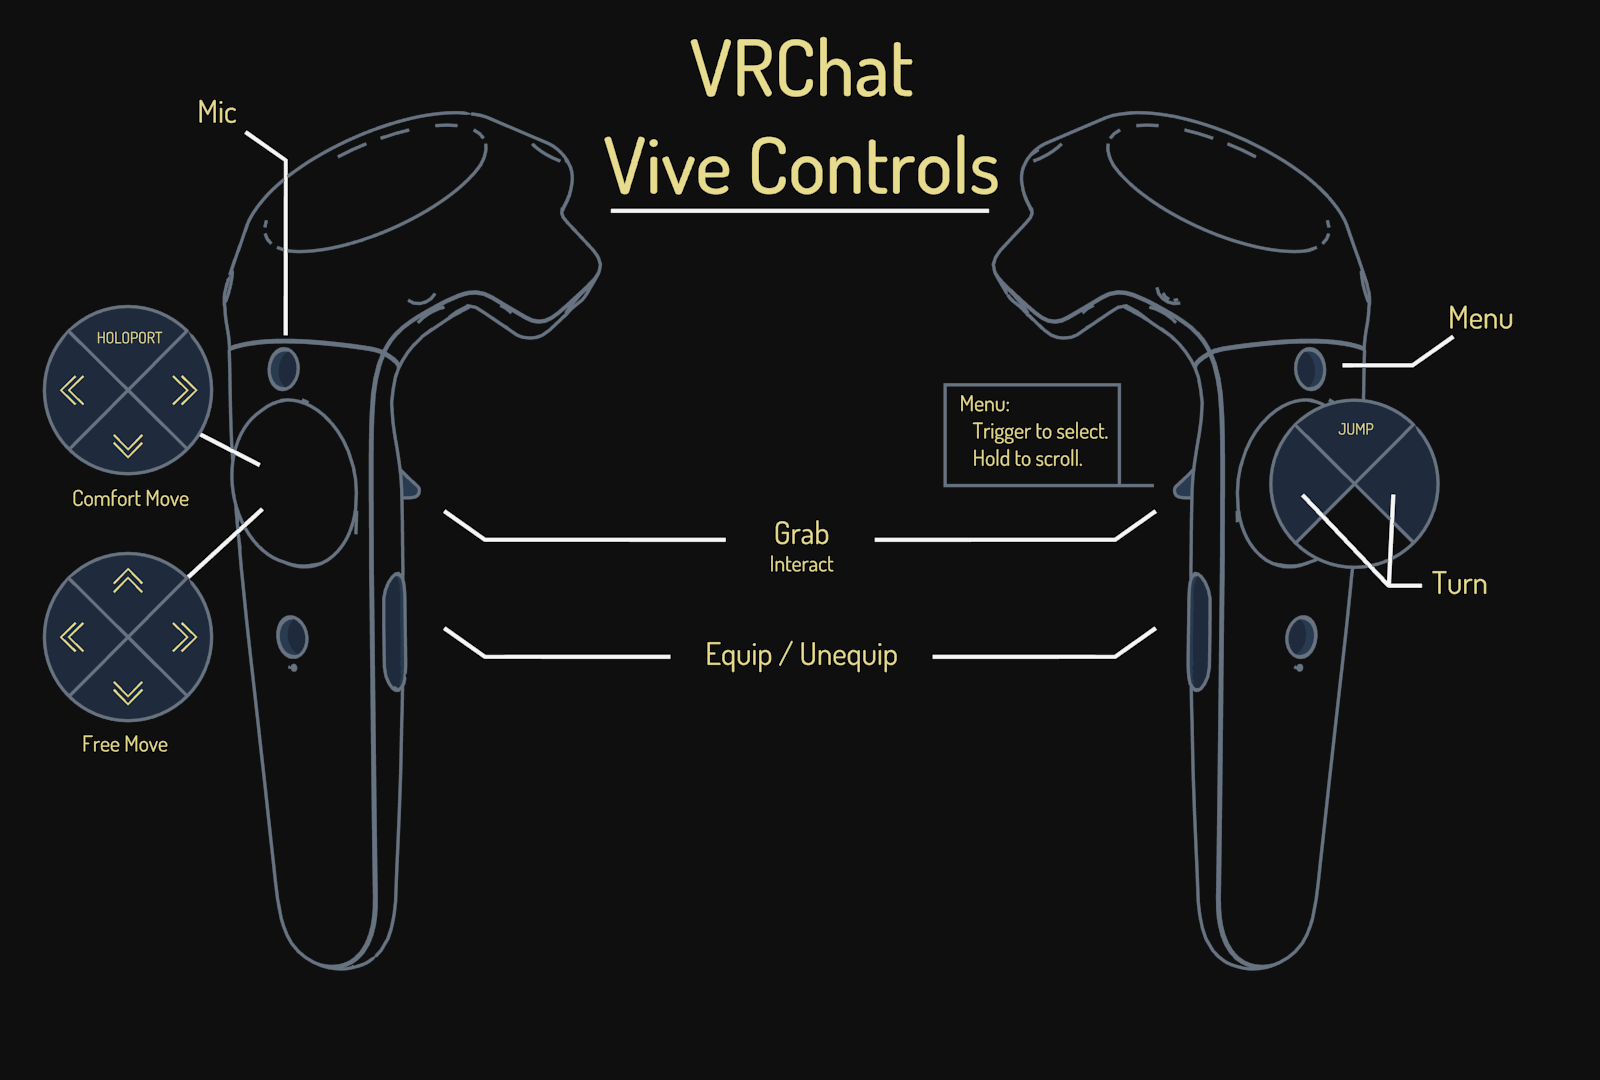 VR Chat controls using HTC Vive